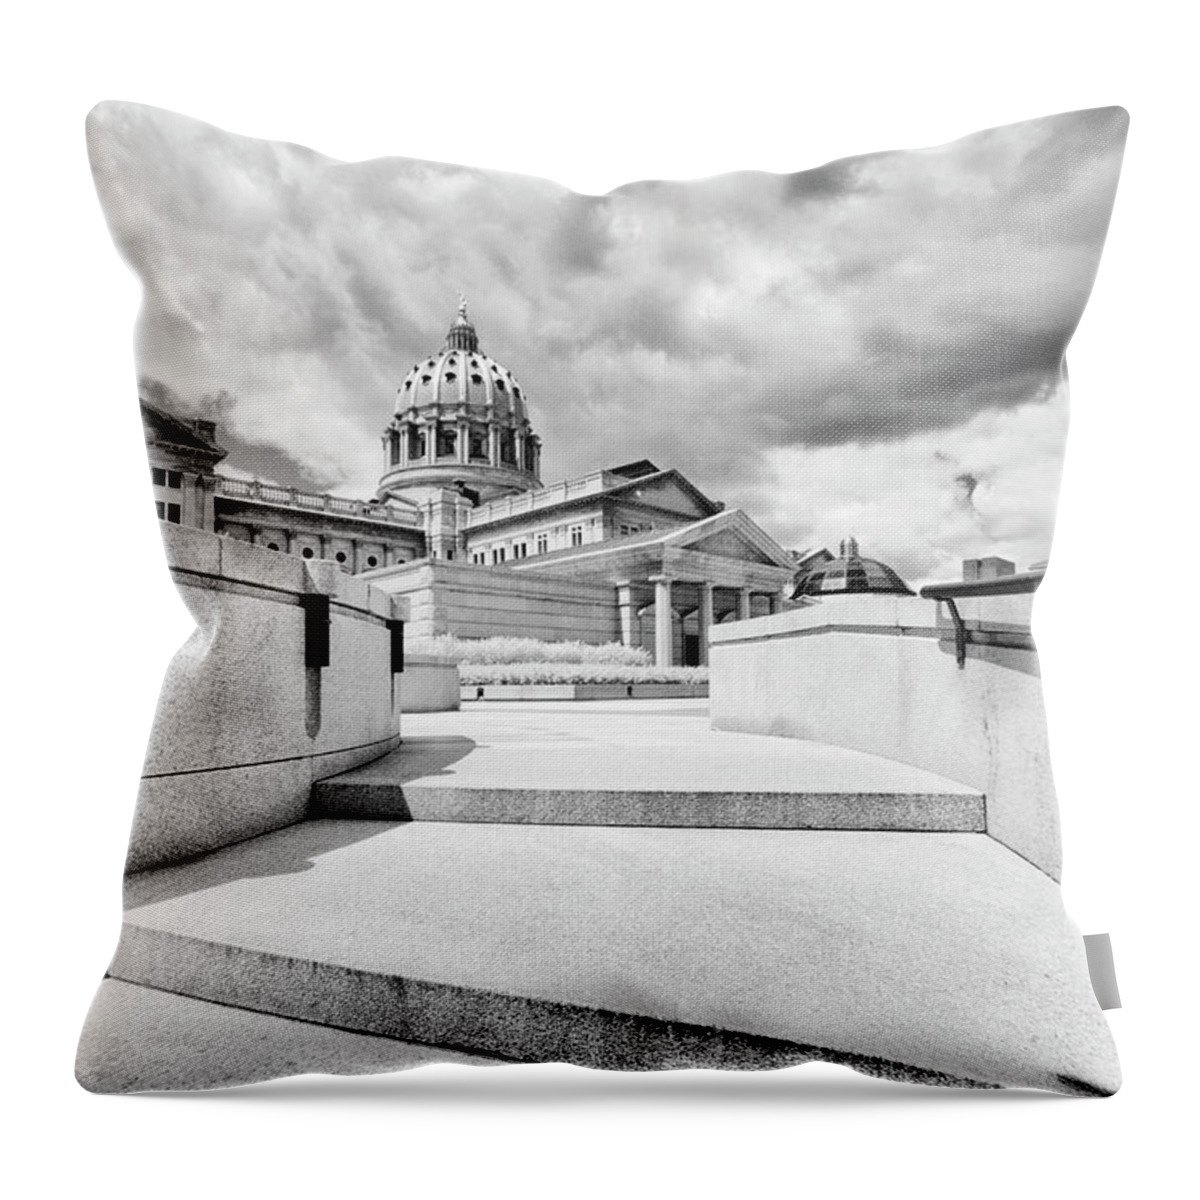 Dir-pa-0306-b-cr Throw Pillow featuring the photograph Walkway up to the Pennsylvania Capital plaza by Paul W Faust - Impressions of Light